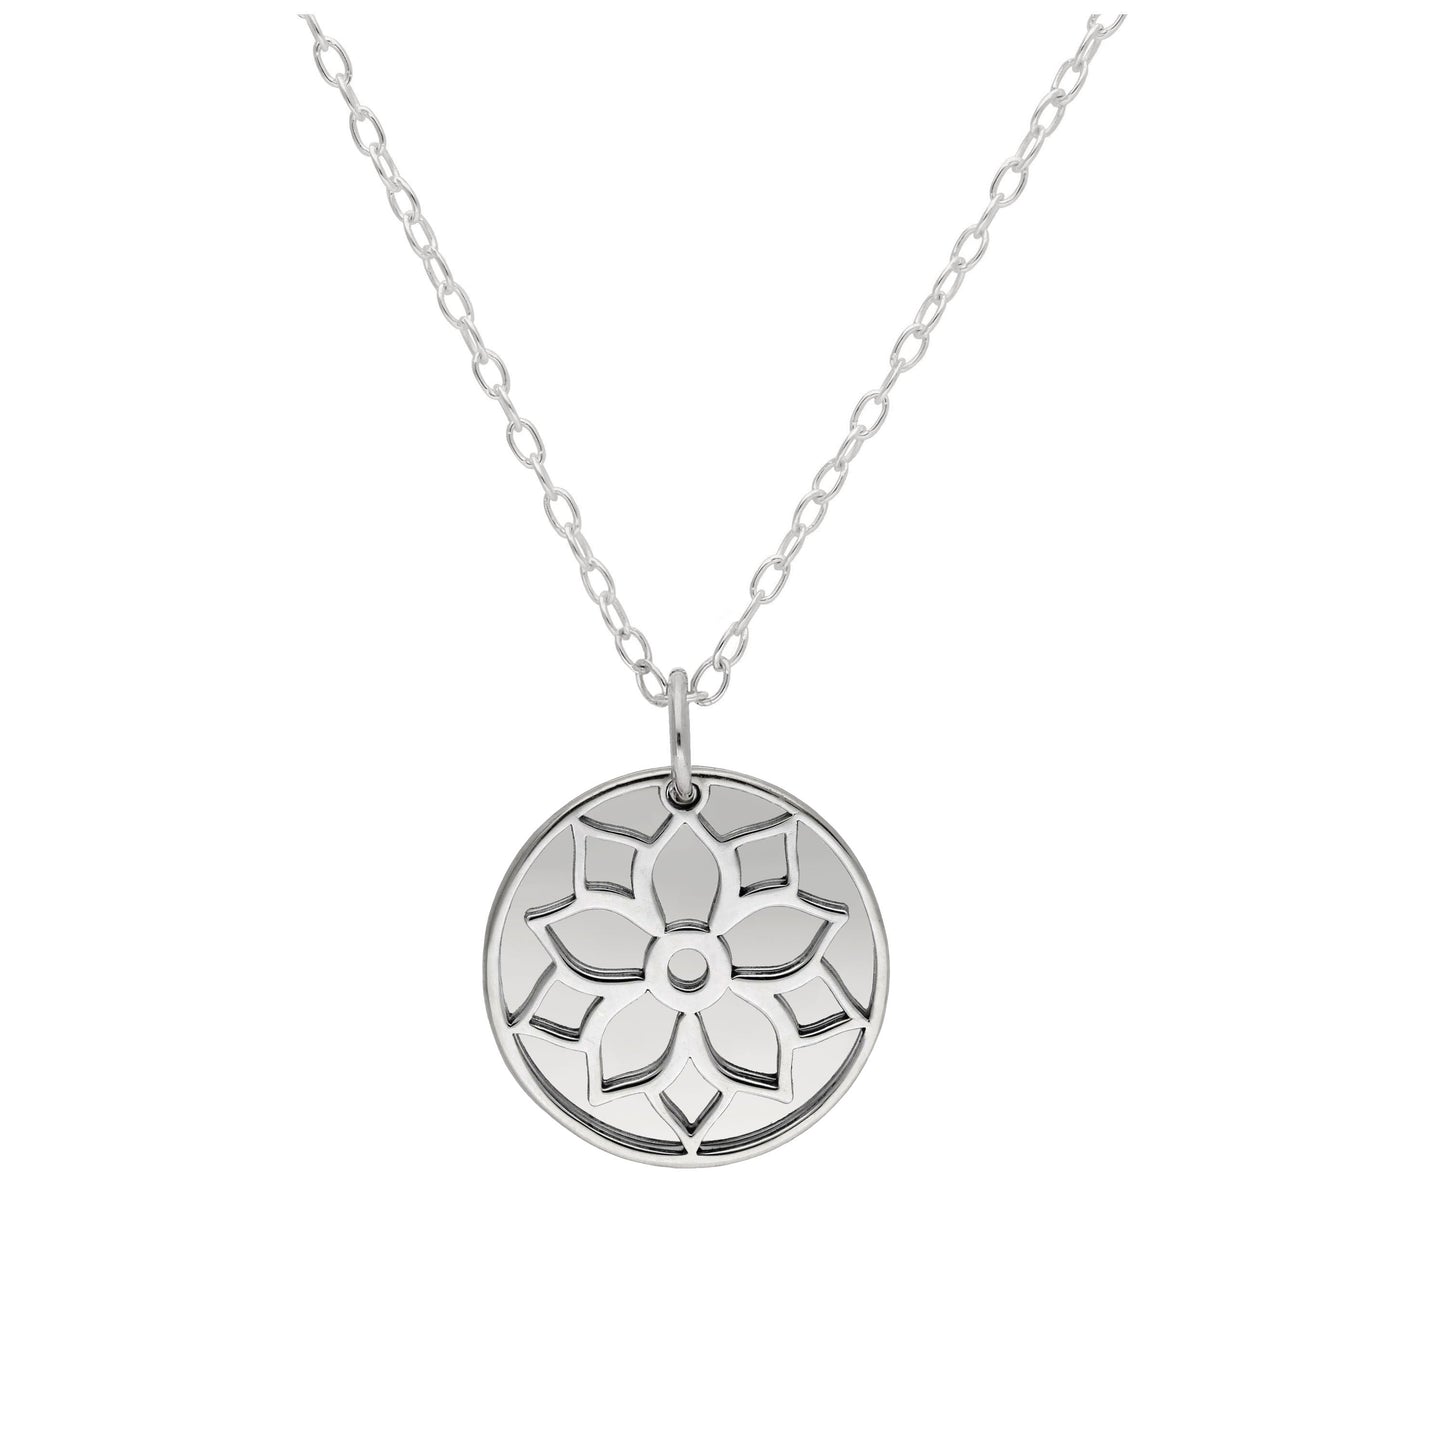 Sterling Silver December Poinsettia Birth Flower & 13mm Engravable Tag Necklace 14 - 22 Inches